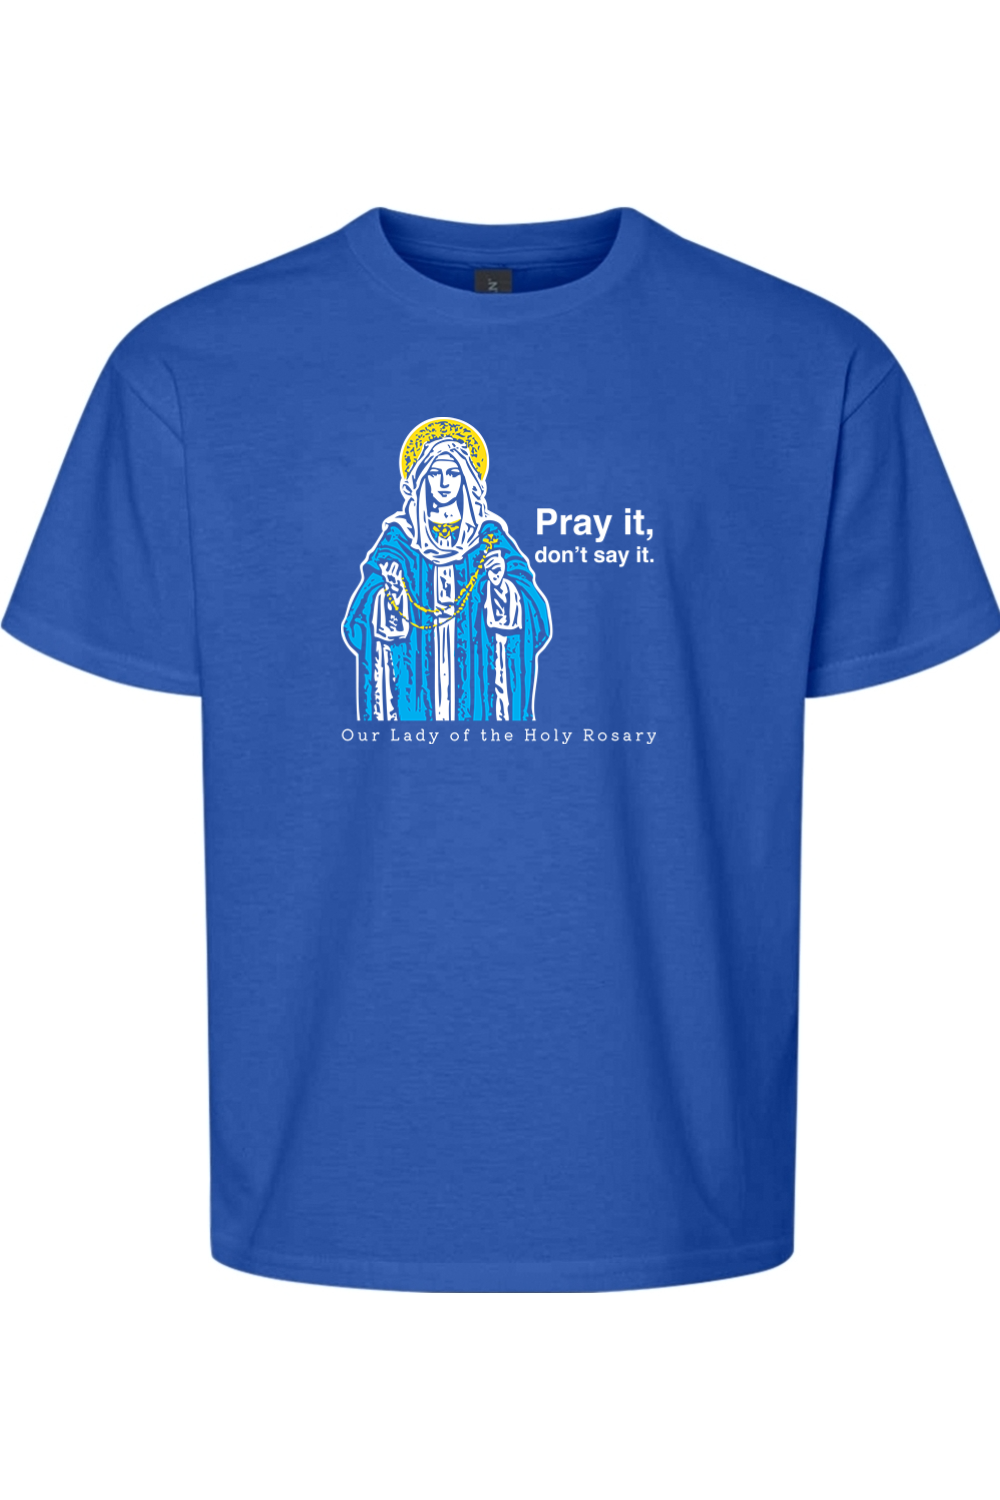 Pray It, Don't Say It – Our Lady of the Rosary Youth T-Shirt